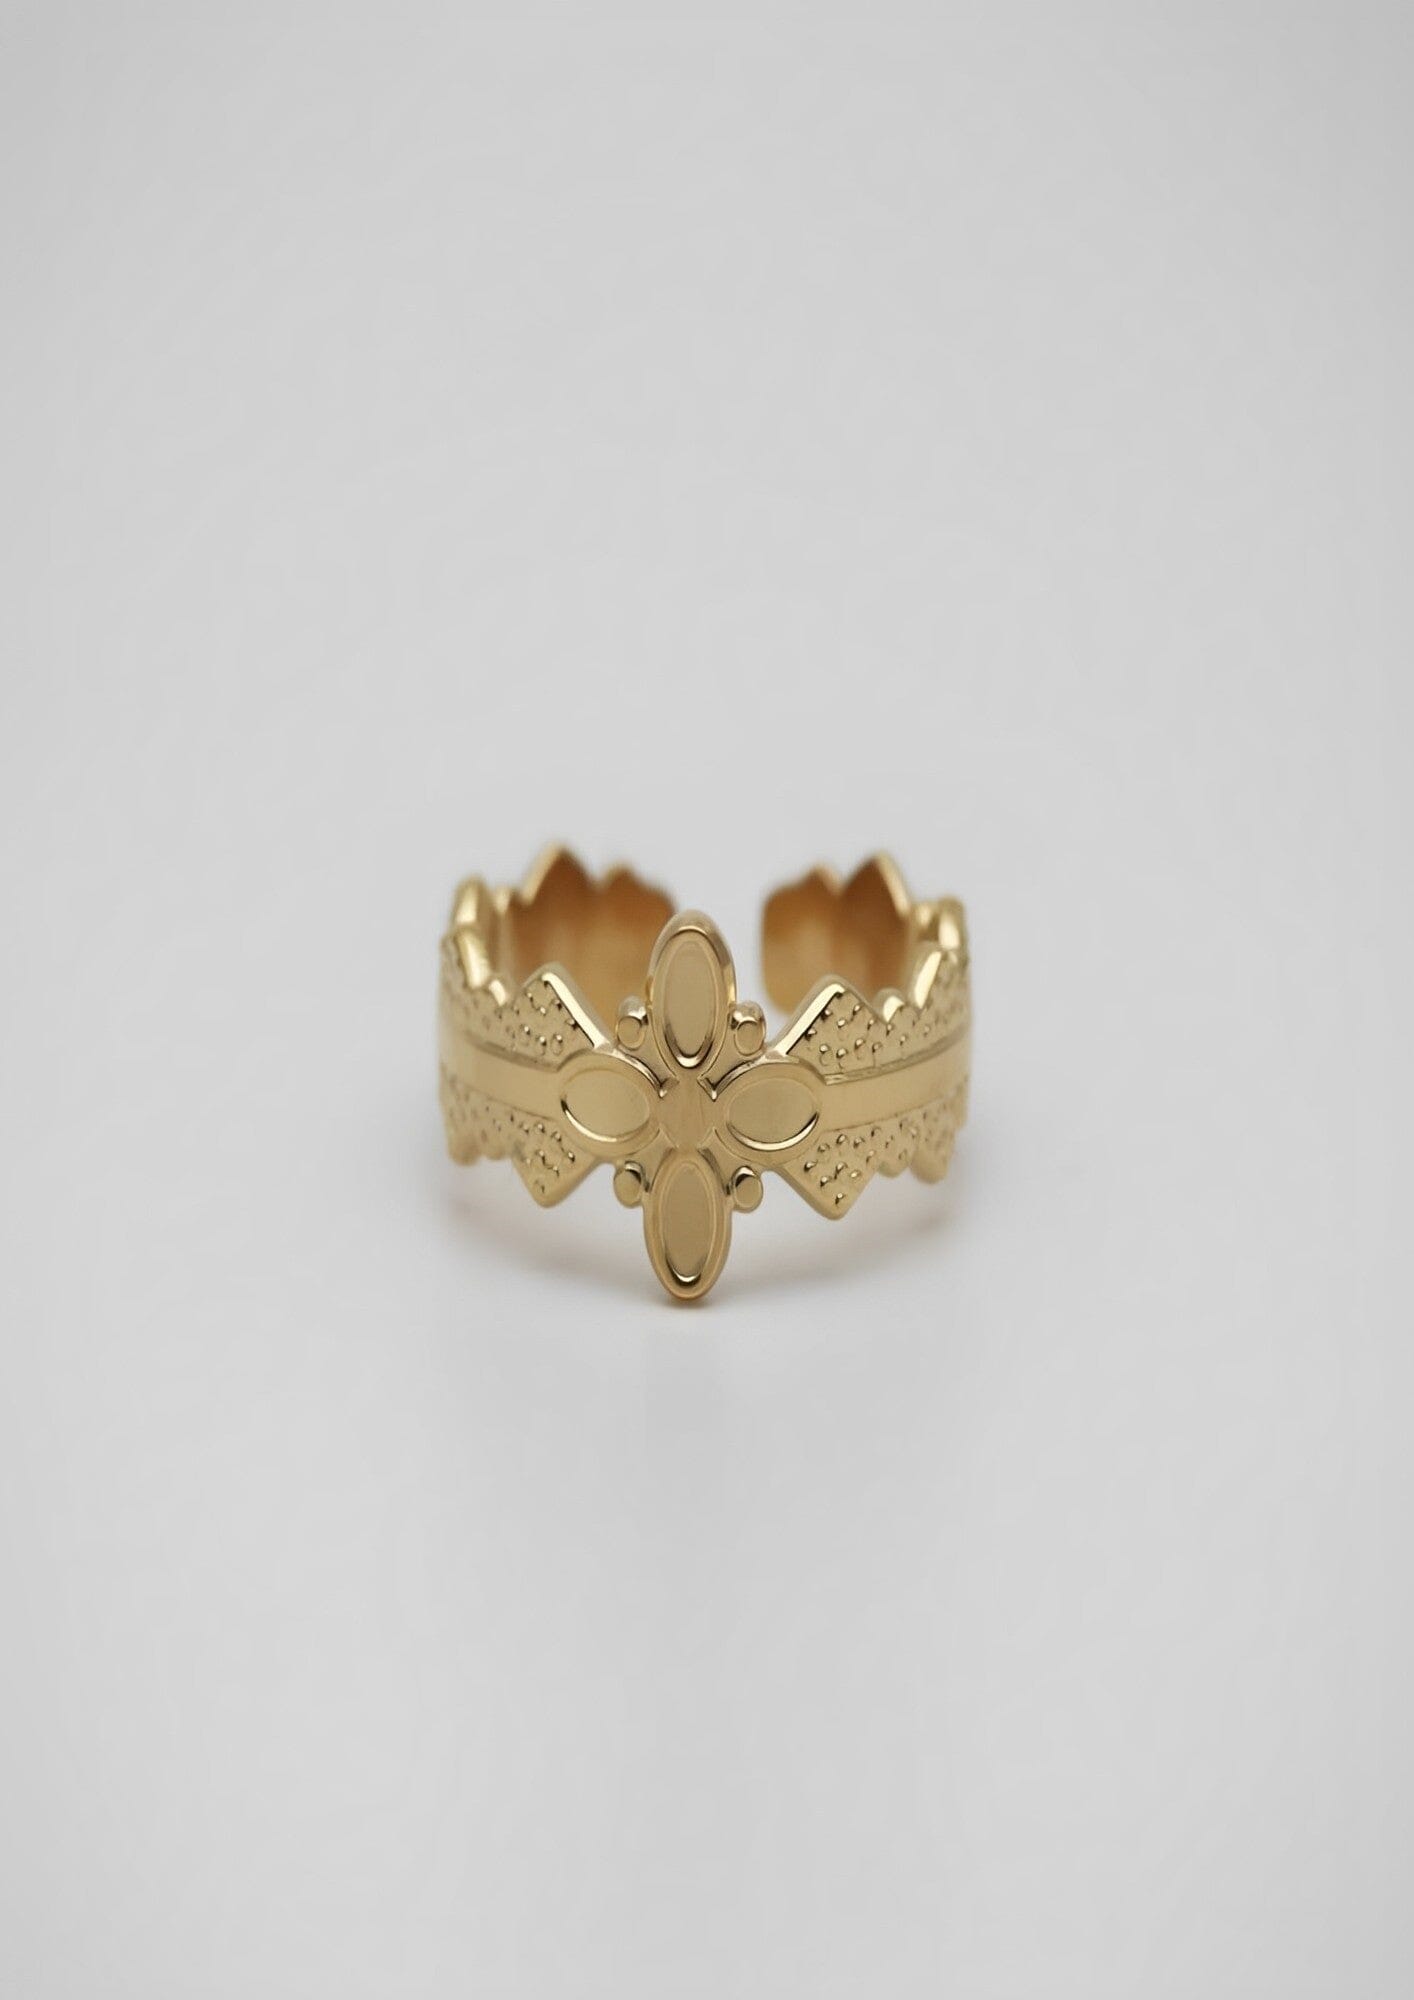 FLOWER ROYAL RING earing Yubama Jewelry Online Store - The Elegant Designs of Gold and Silver ! 